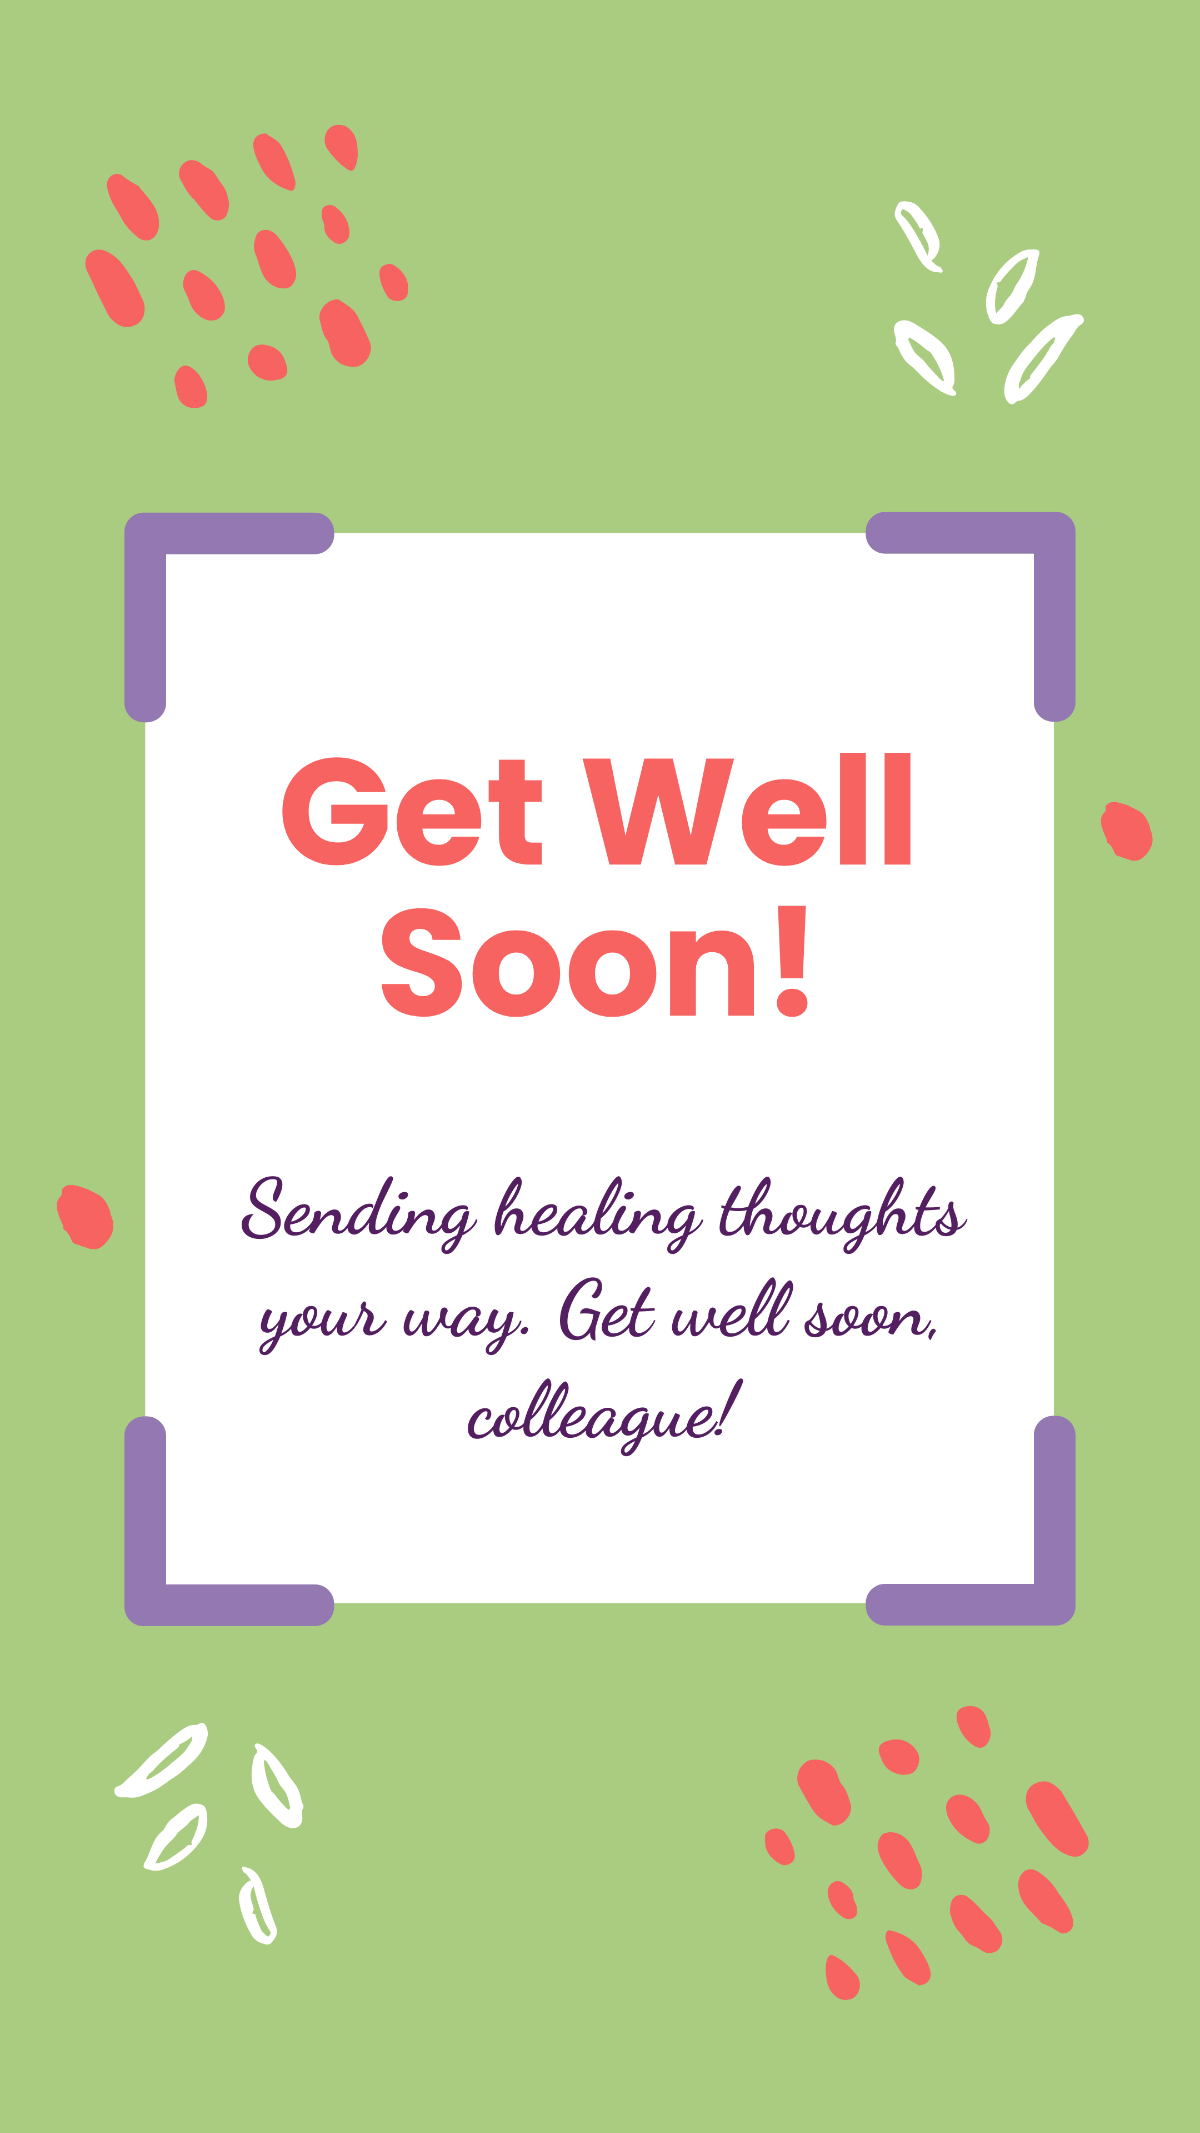 Get Well Soon Email For Colleague